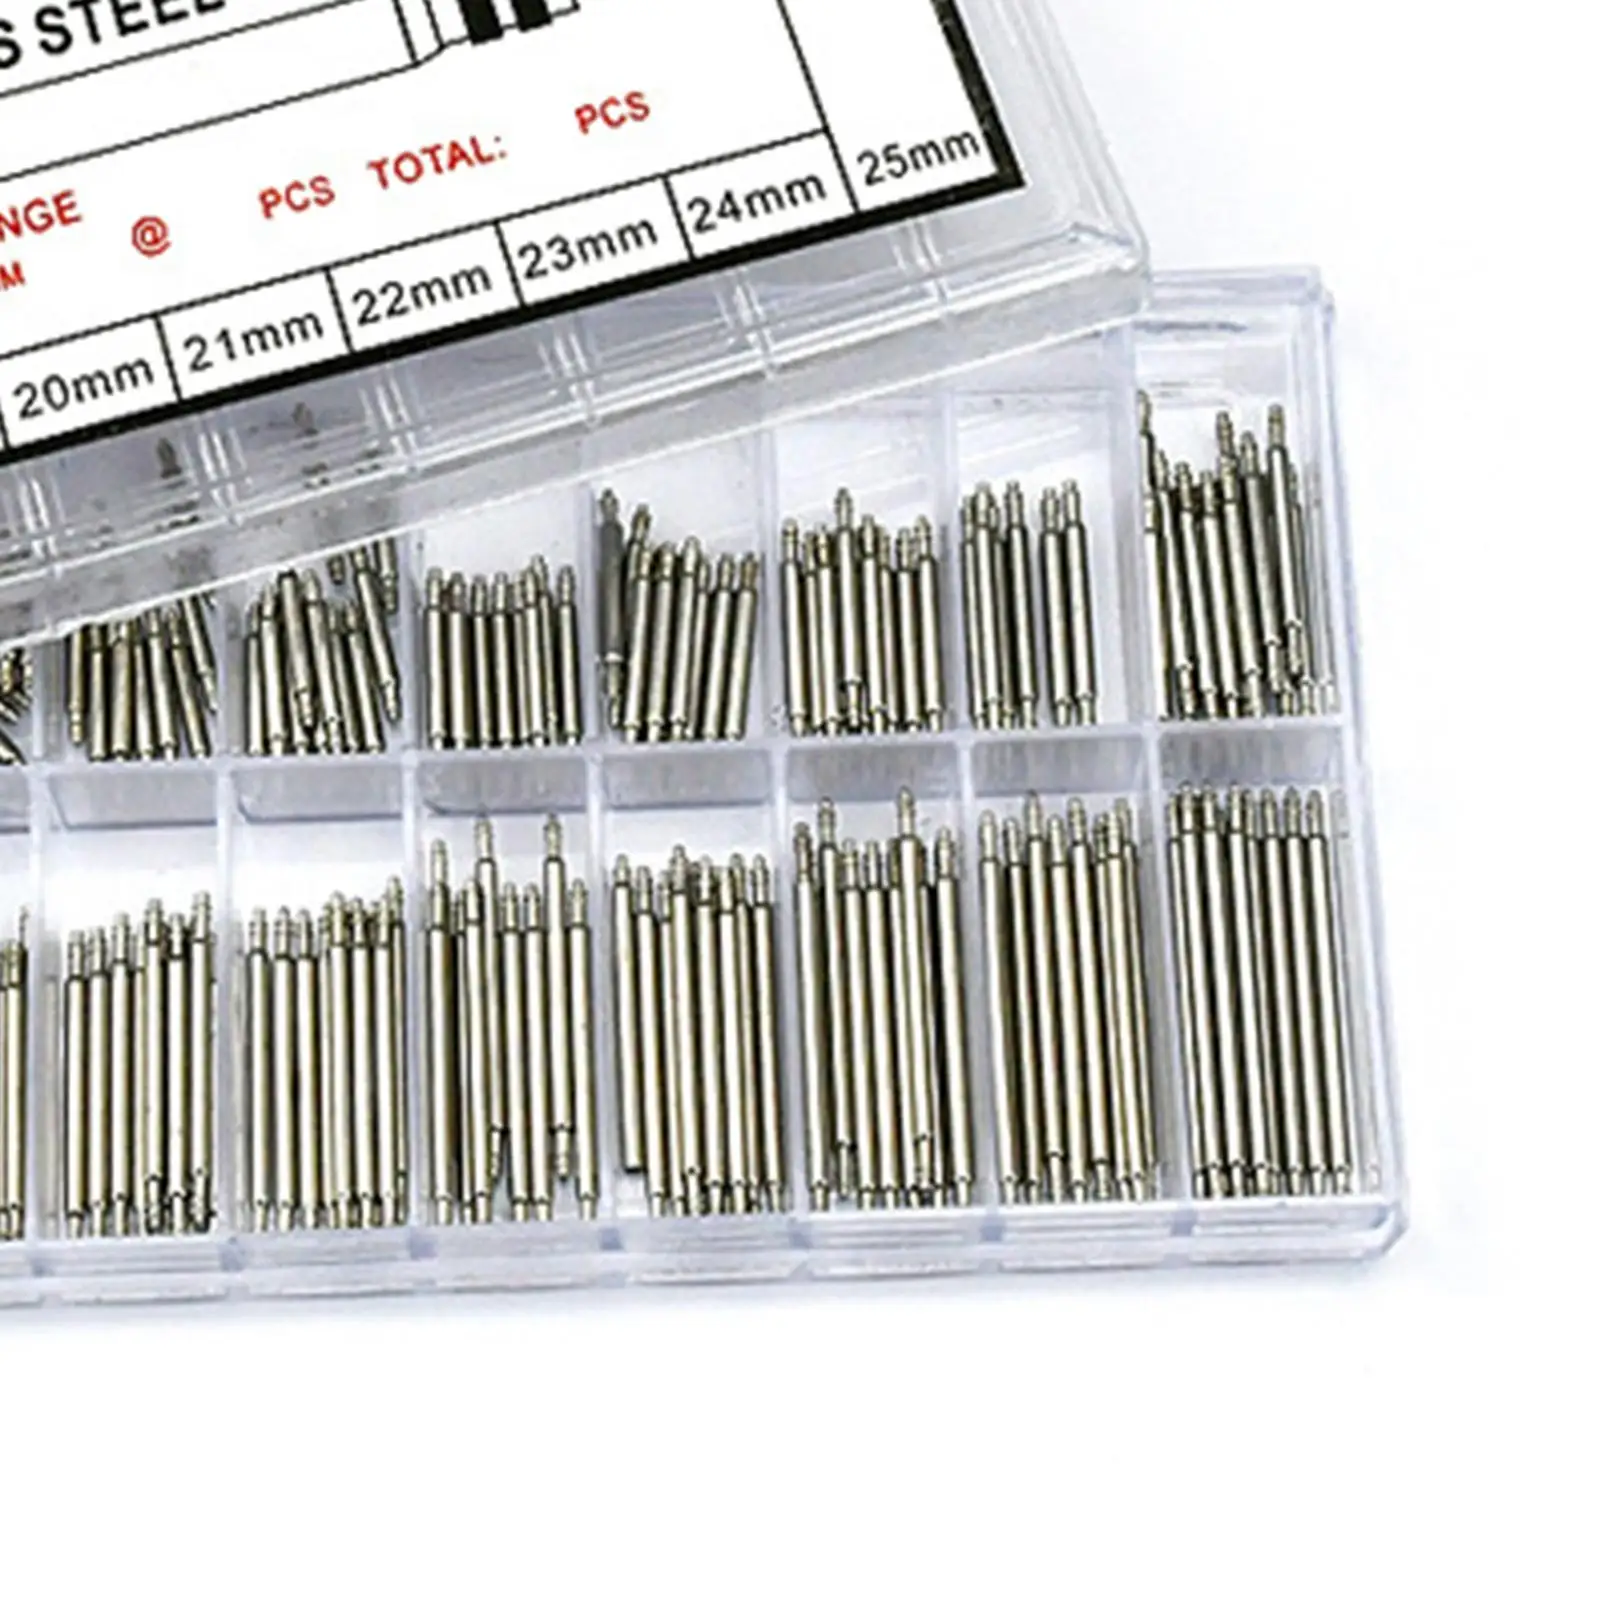 360x Stainless Steel Watch Band Spring Bars 8mm-25mm Double Flange Strap Link Pins for Repair Replacment 18 Sizes Straight Pin